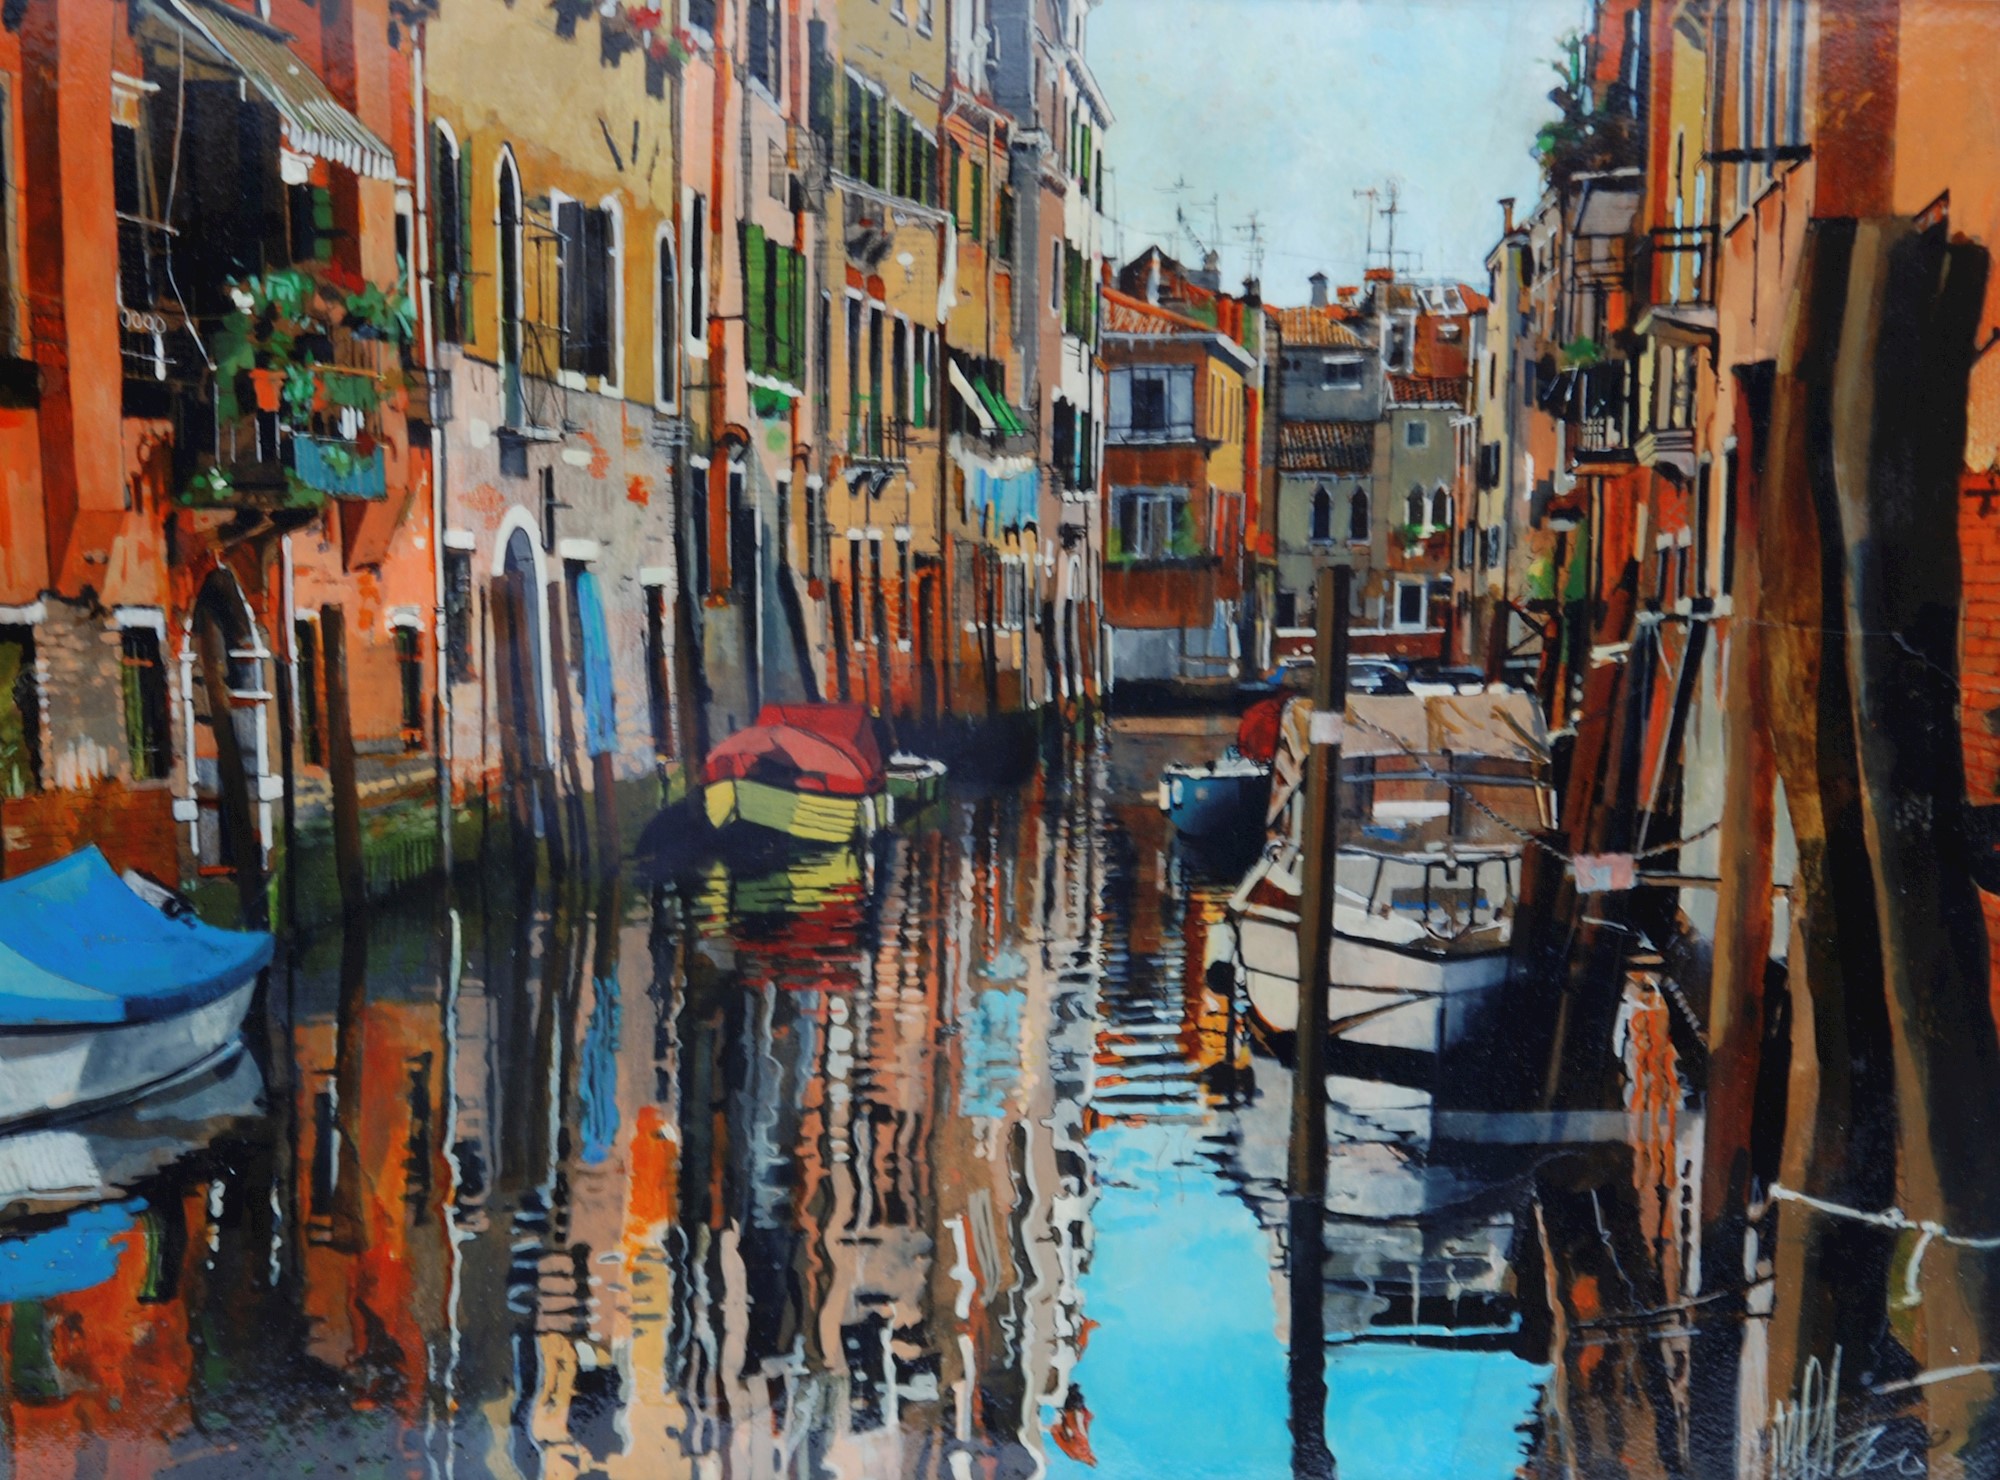 'Venice Canal' by artist Malcolm Cheape